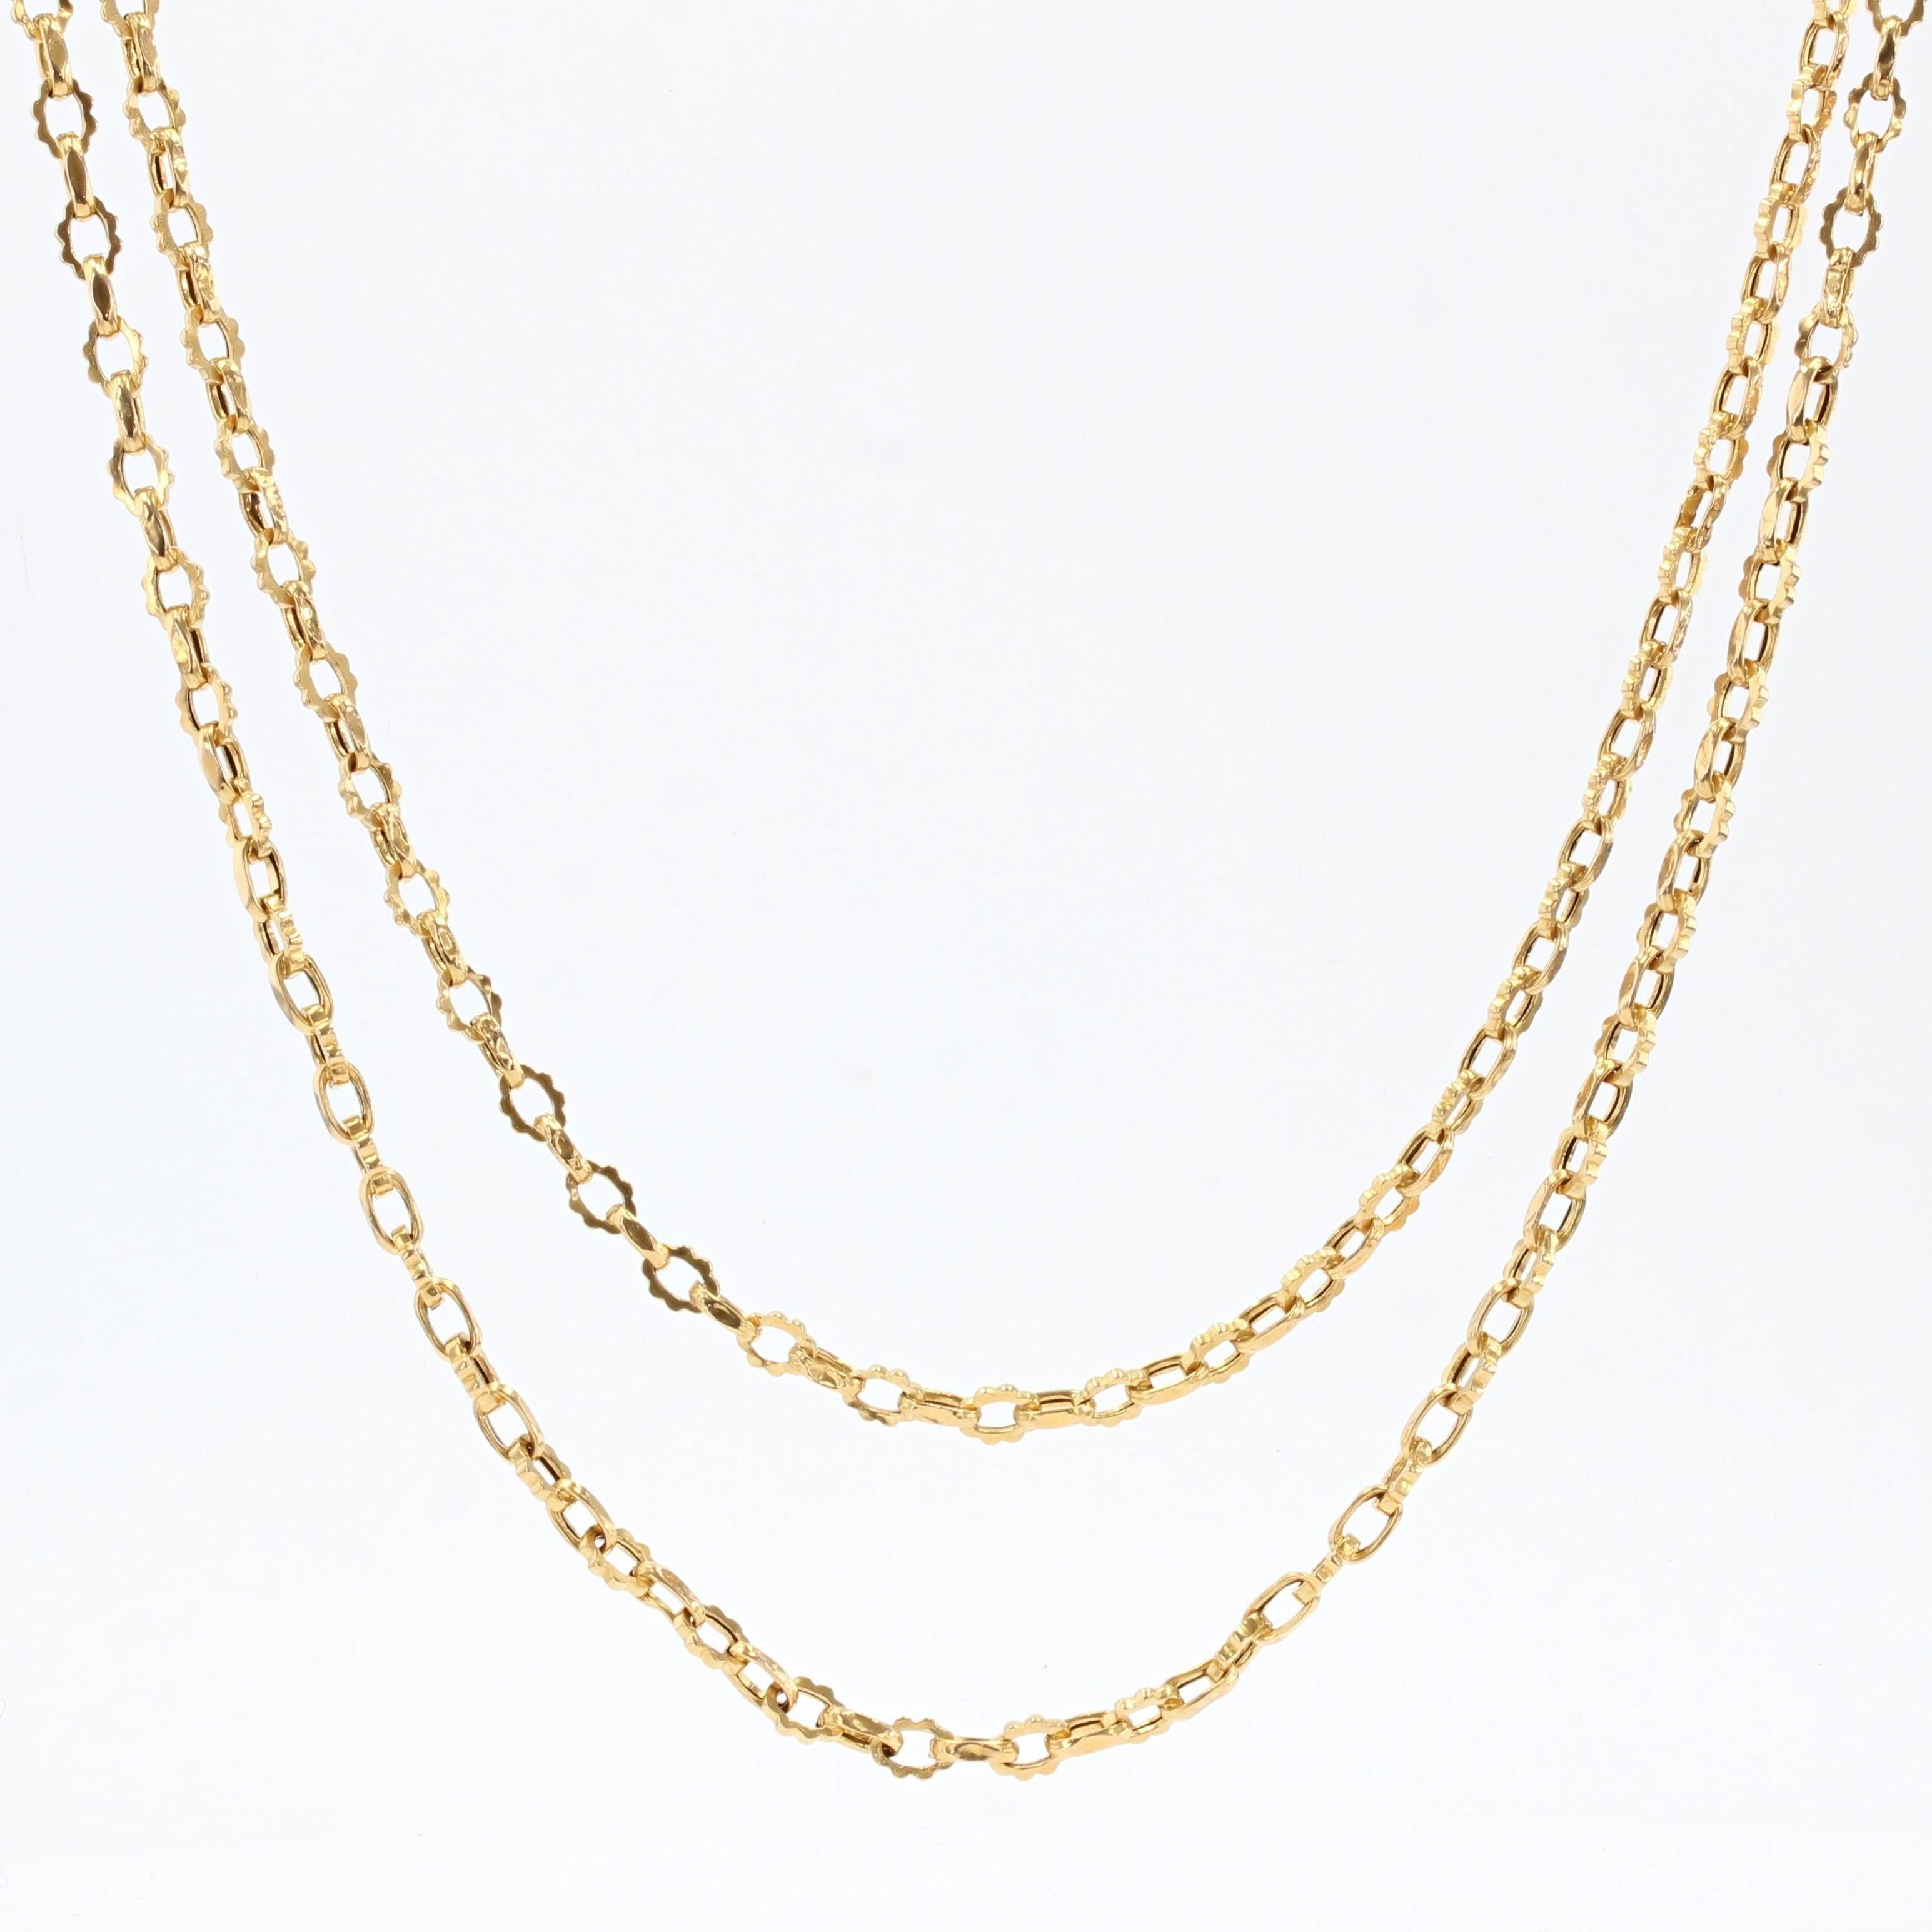 French 1830s 18 Karat Yellow Gold Chiseled Mesh Long Necklace For Sale 3